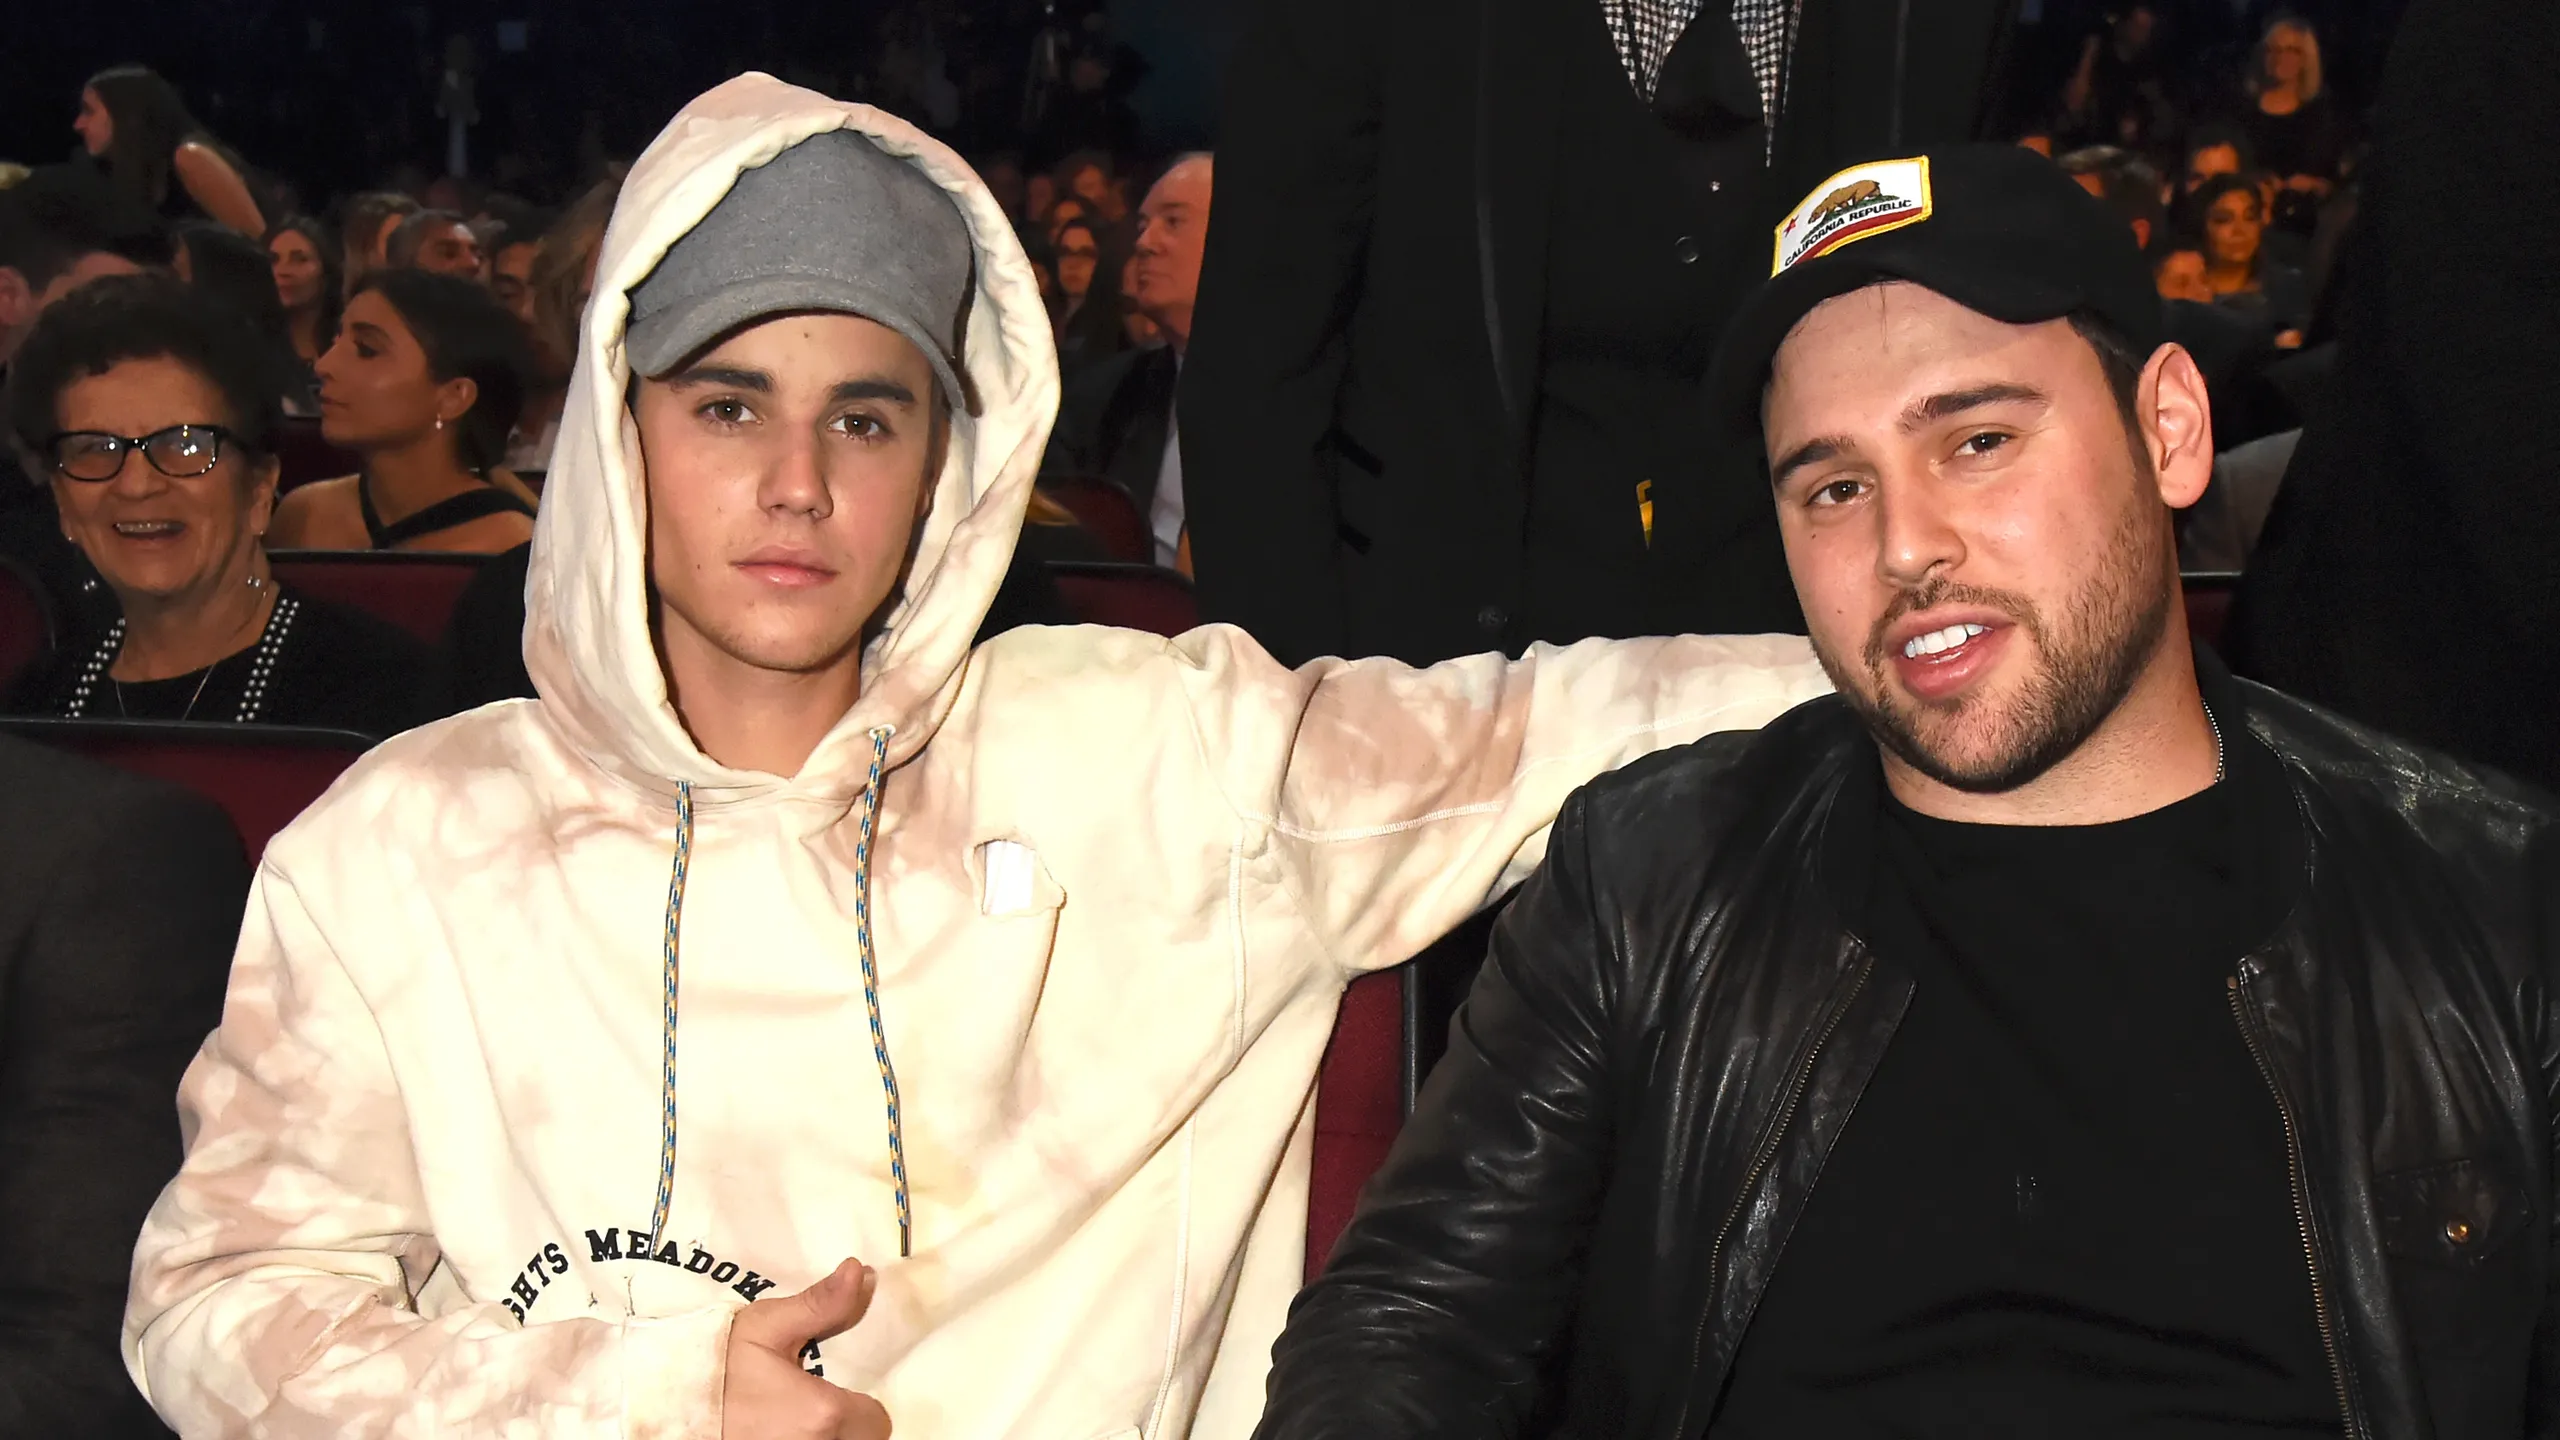 Scooter Braun with Justing Bieber. 